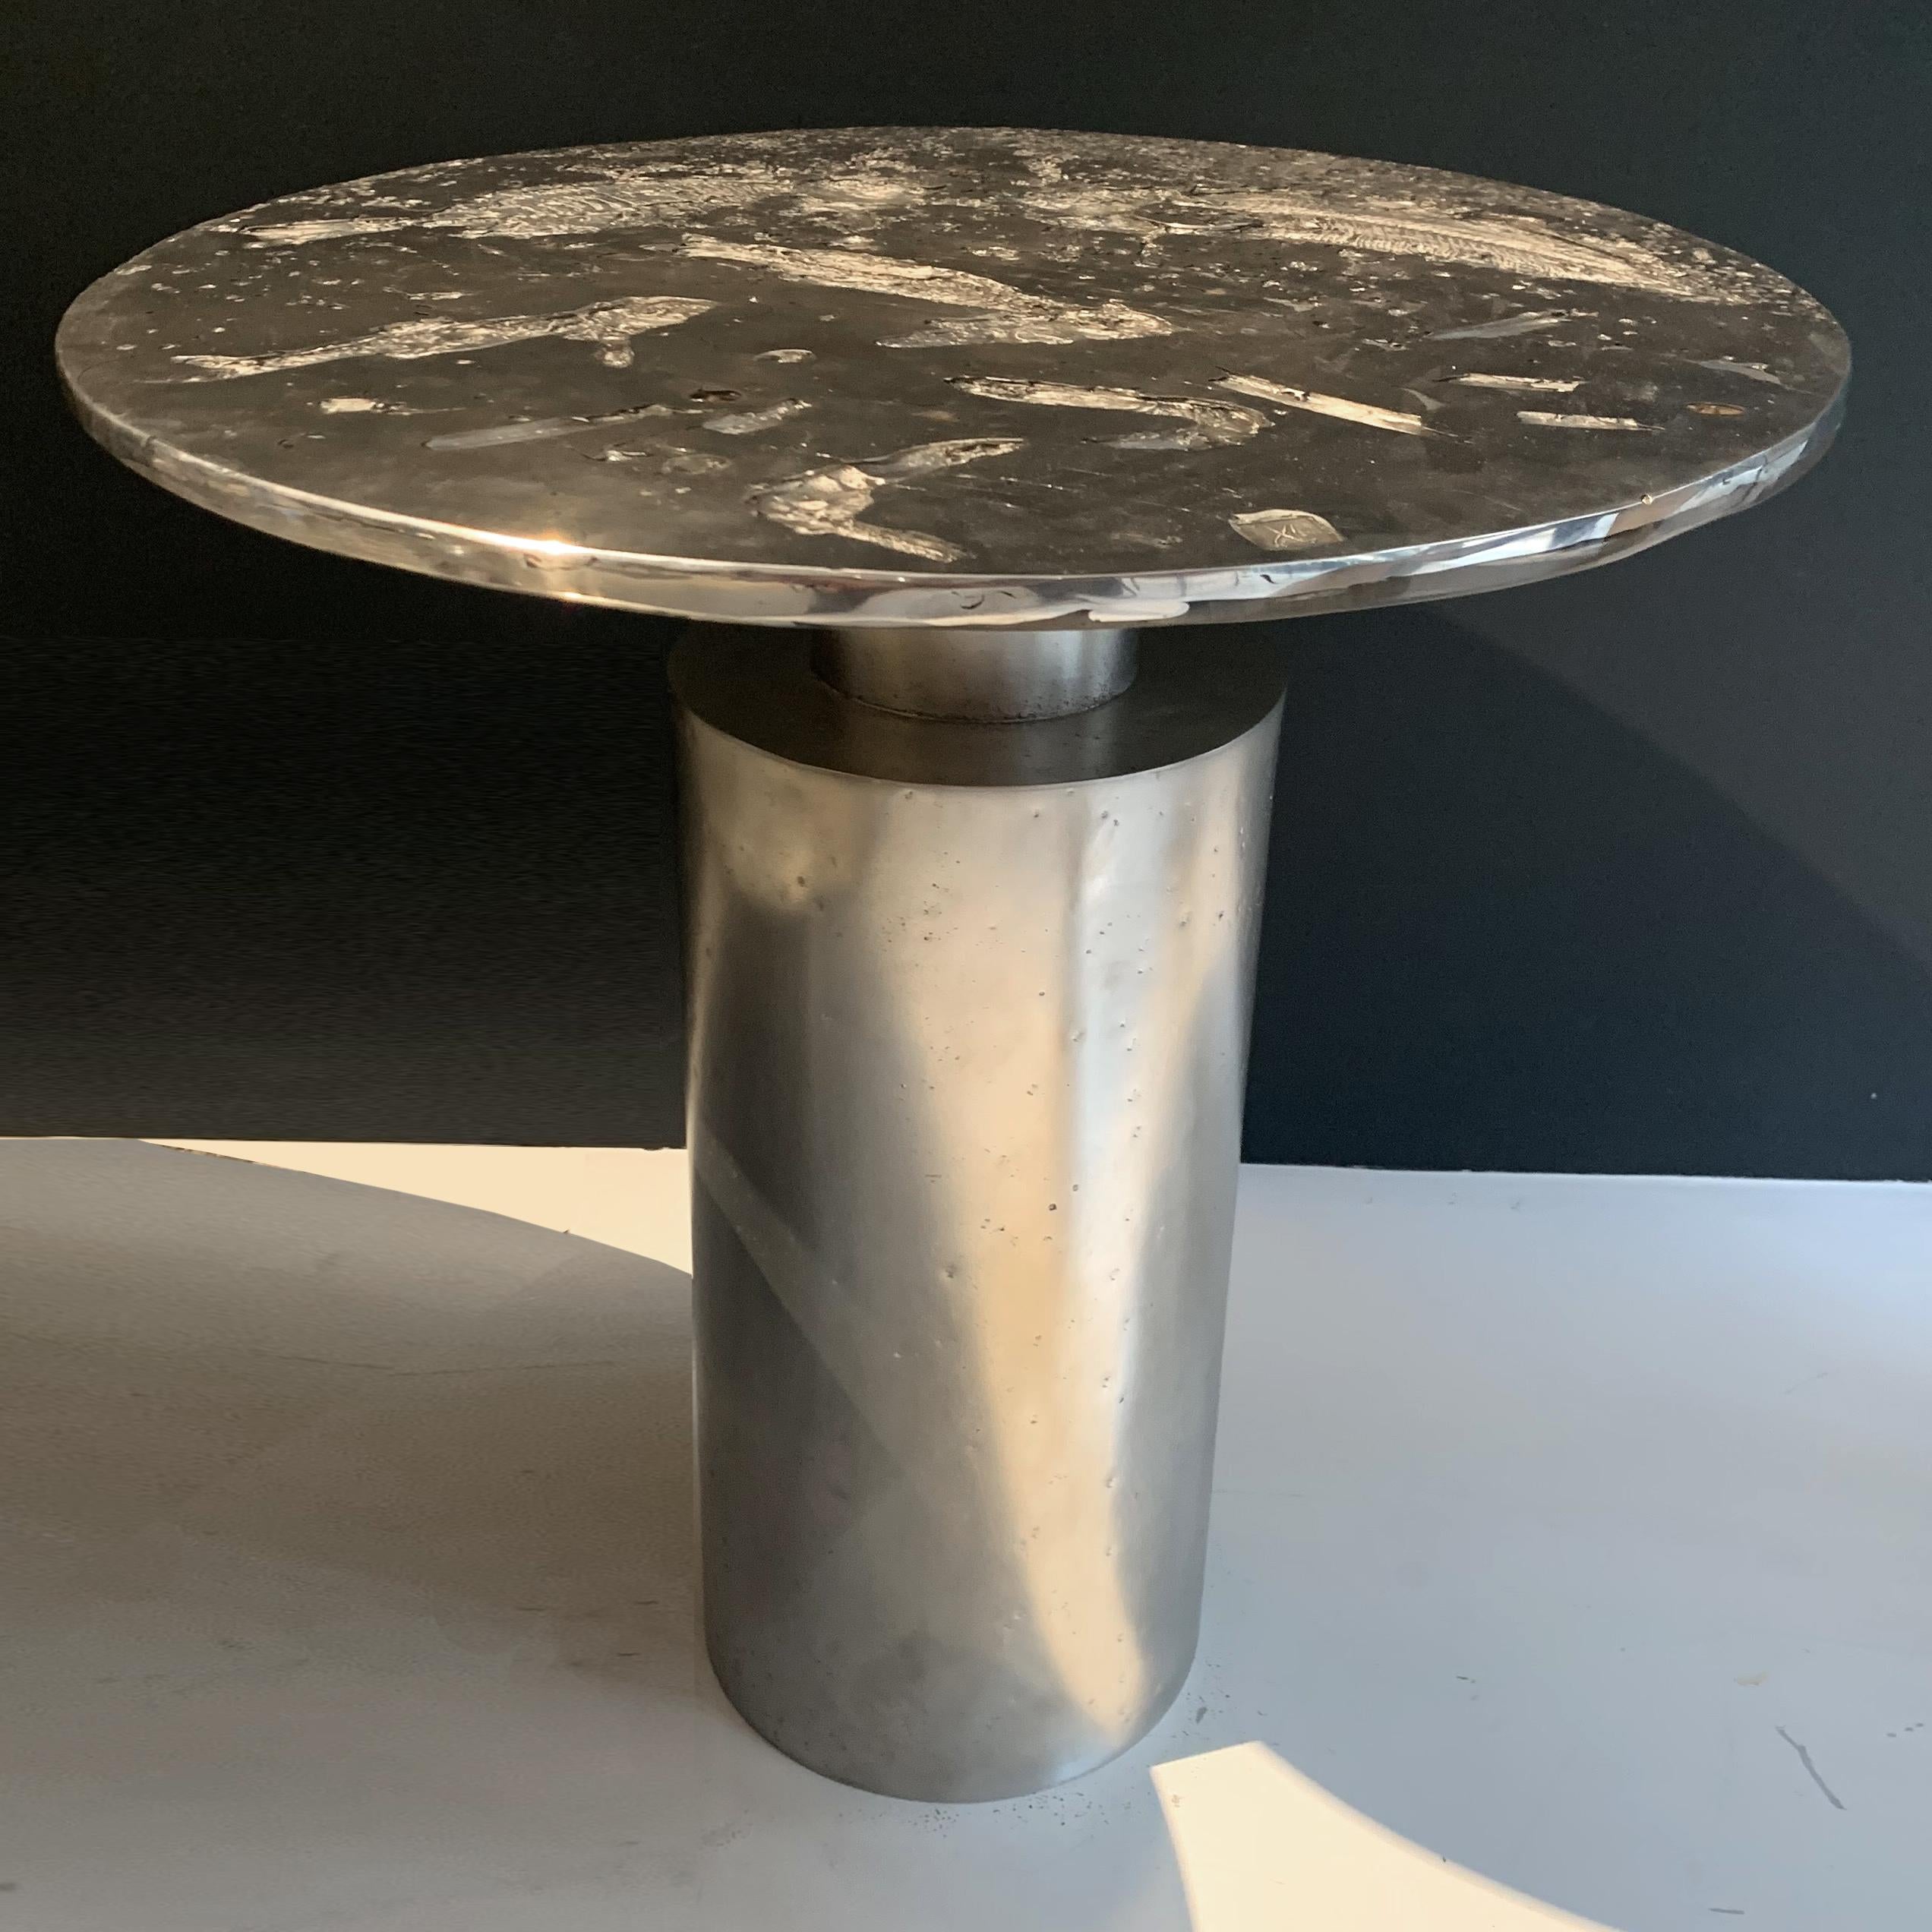 In stock: This contemporary coffee table is a unique piece, created by Xavier Lavergne and made of melted pewter with crystal resin. The table is handmade in France. For this project, Xavier Lavergne did cast pewter on real Shrimps, Sea breams, Red